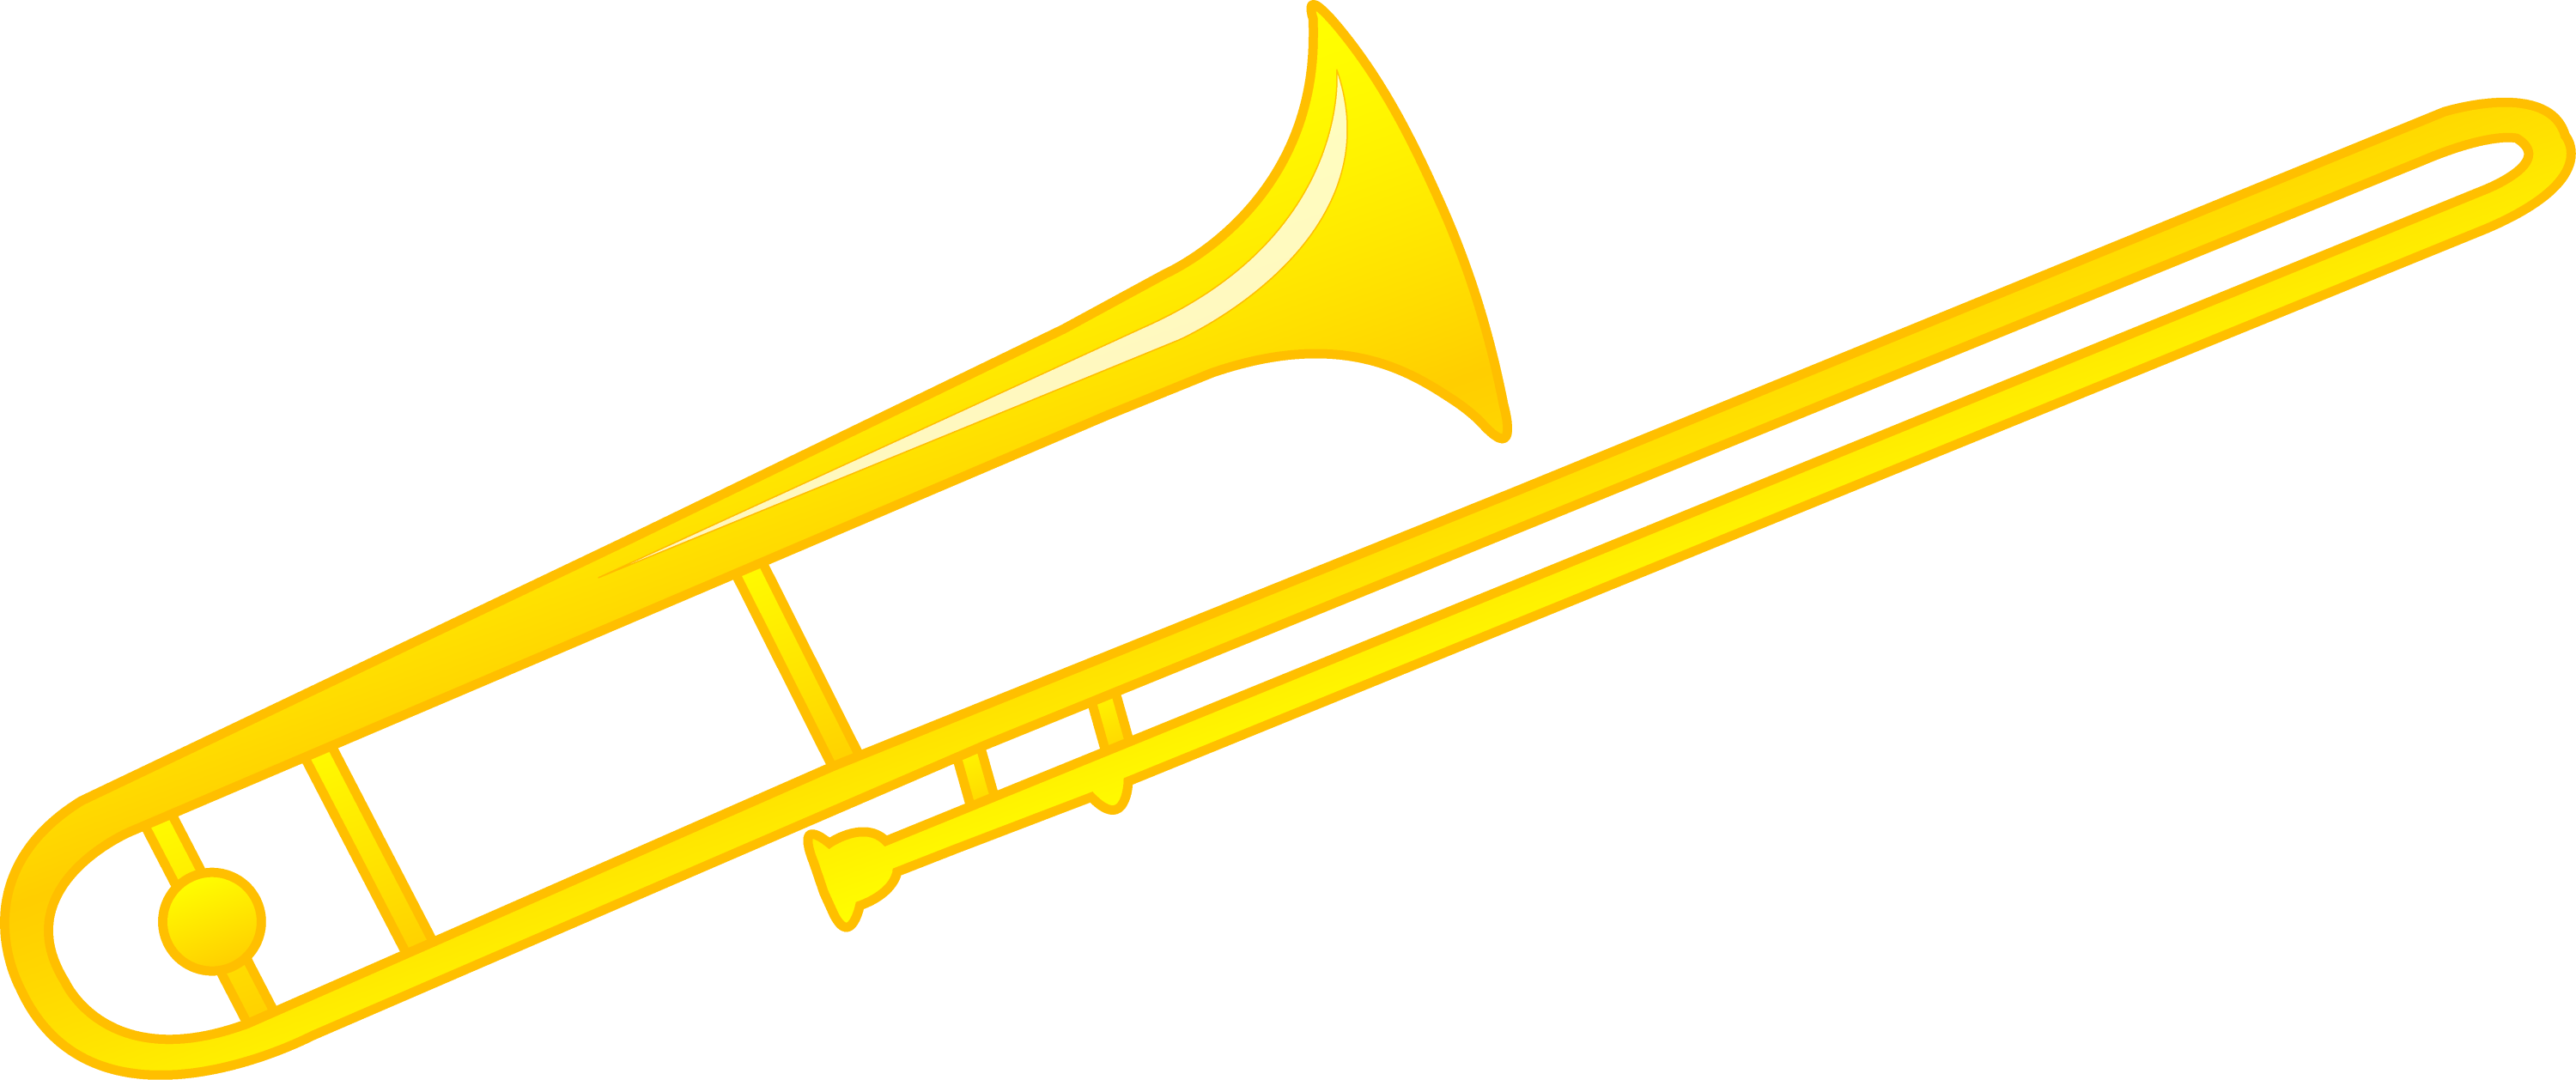 clipart music instruments free - photo #41